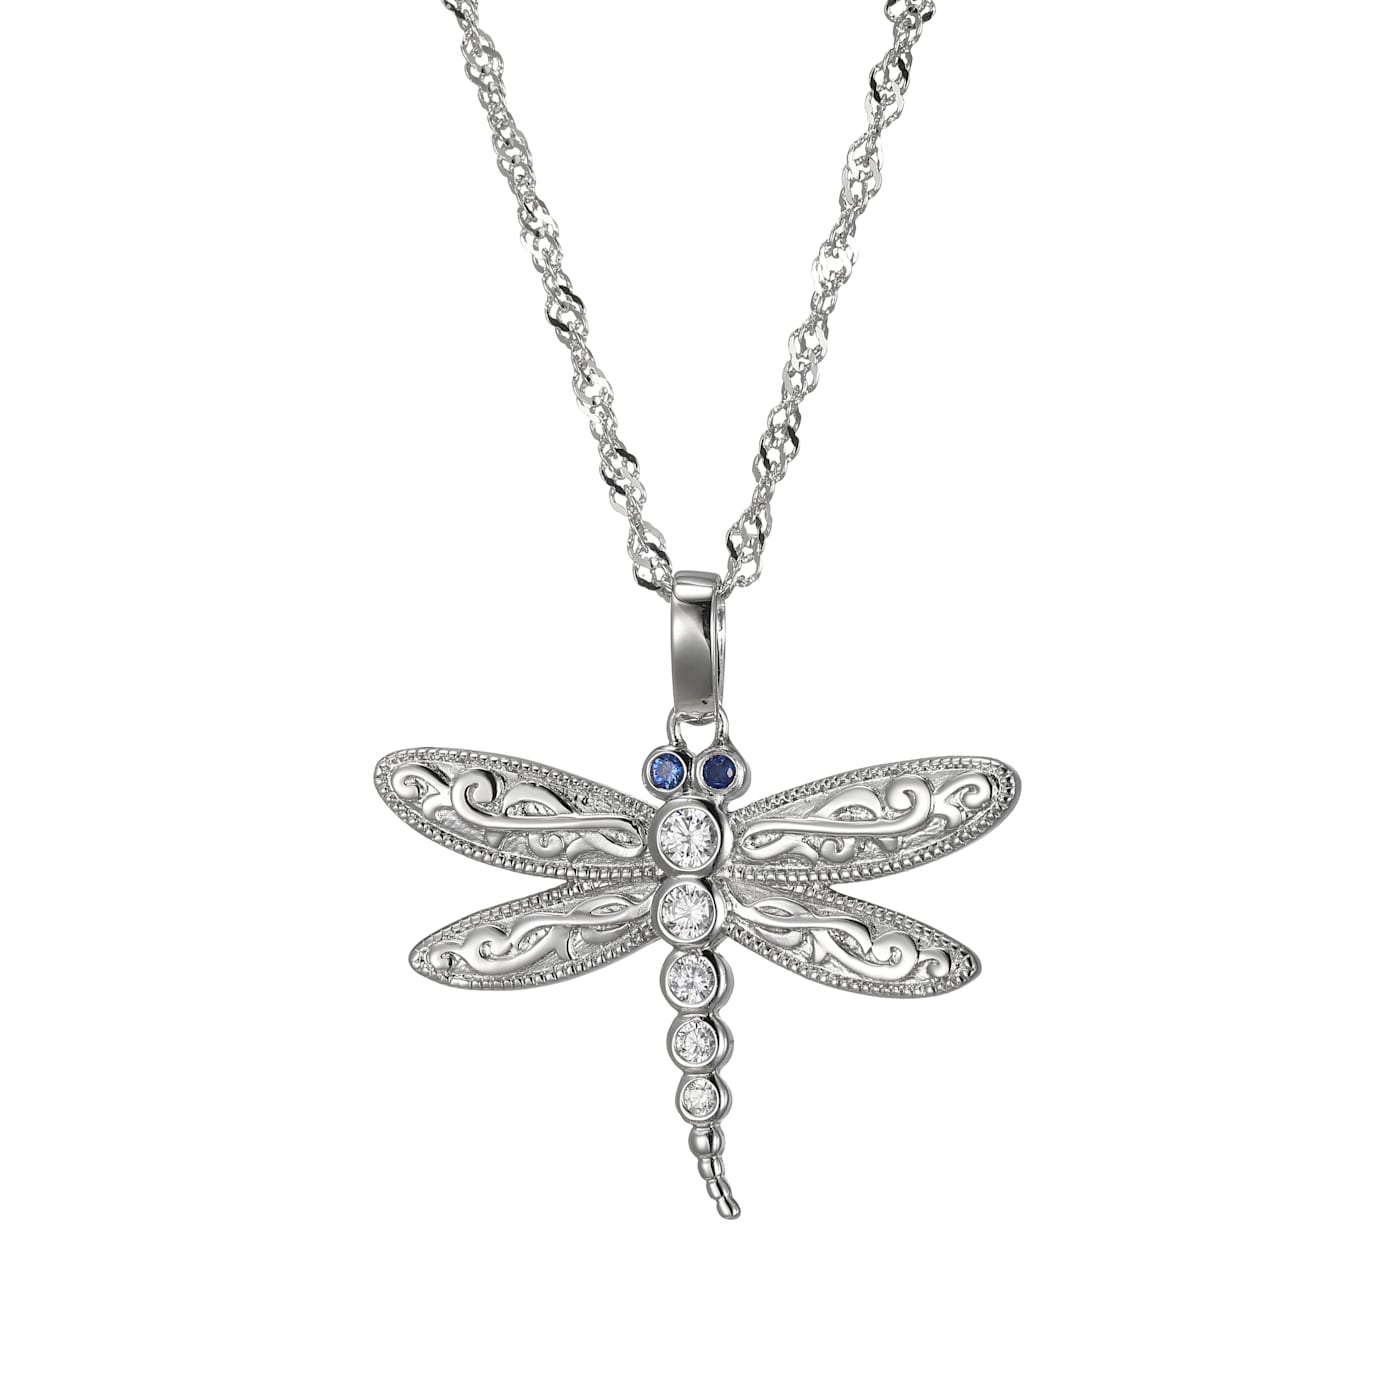 Dragonfly Necklace Gold/White Opal - $58.00